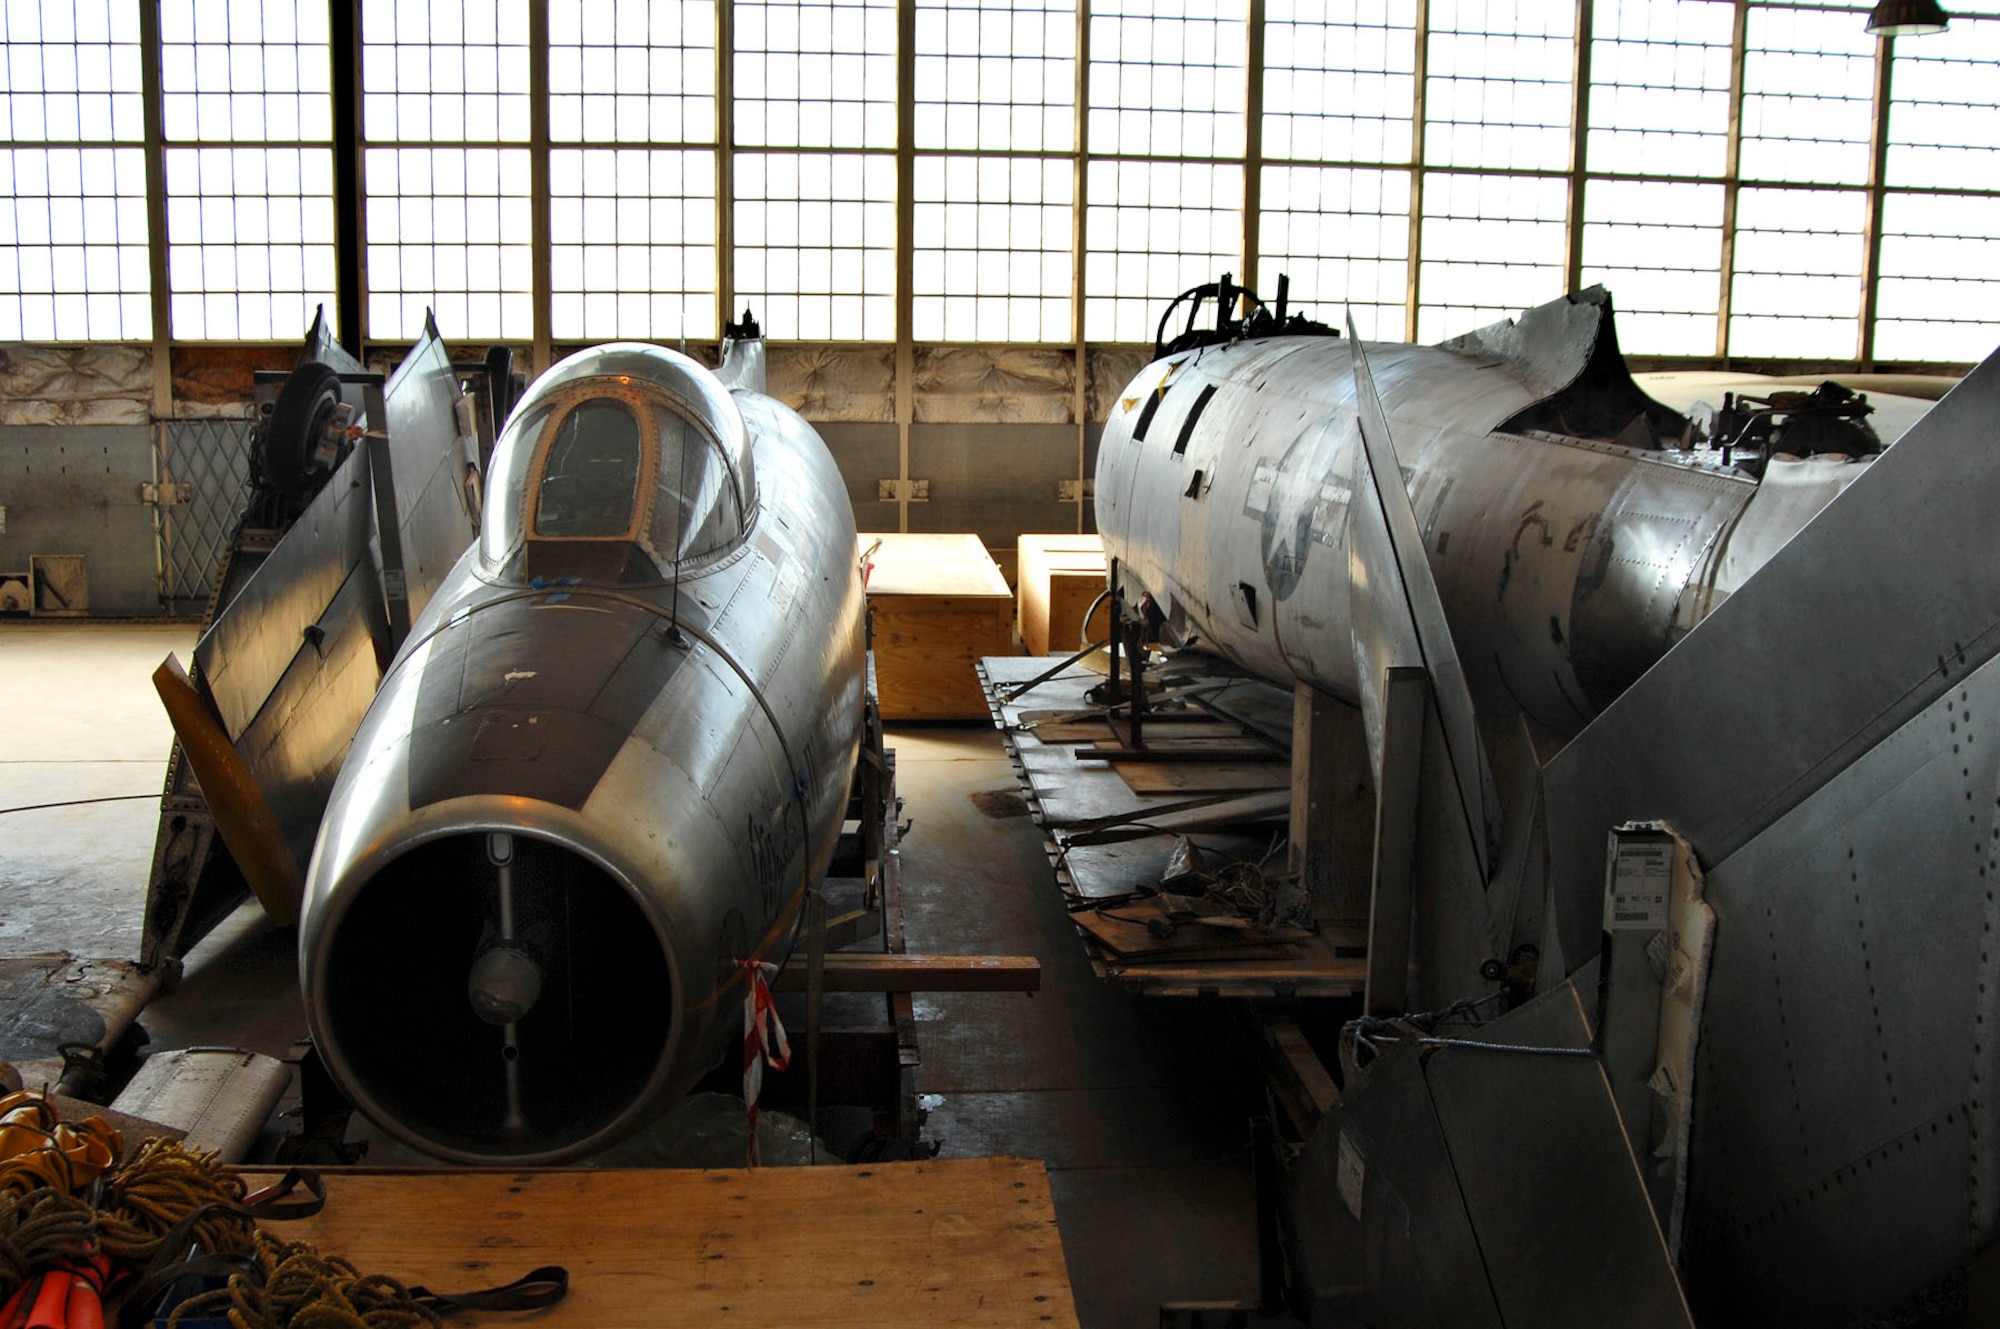 DAYTON, Ohio (02/2007) -- Mystere IVA (left) and F-86A (right) in the restoration hangar of the National Museum of the U.S. Air Force. (U.S. Air Force photo)